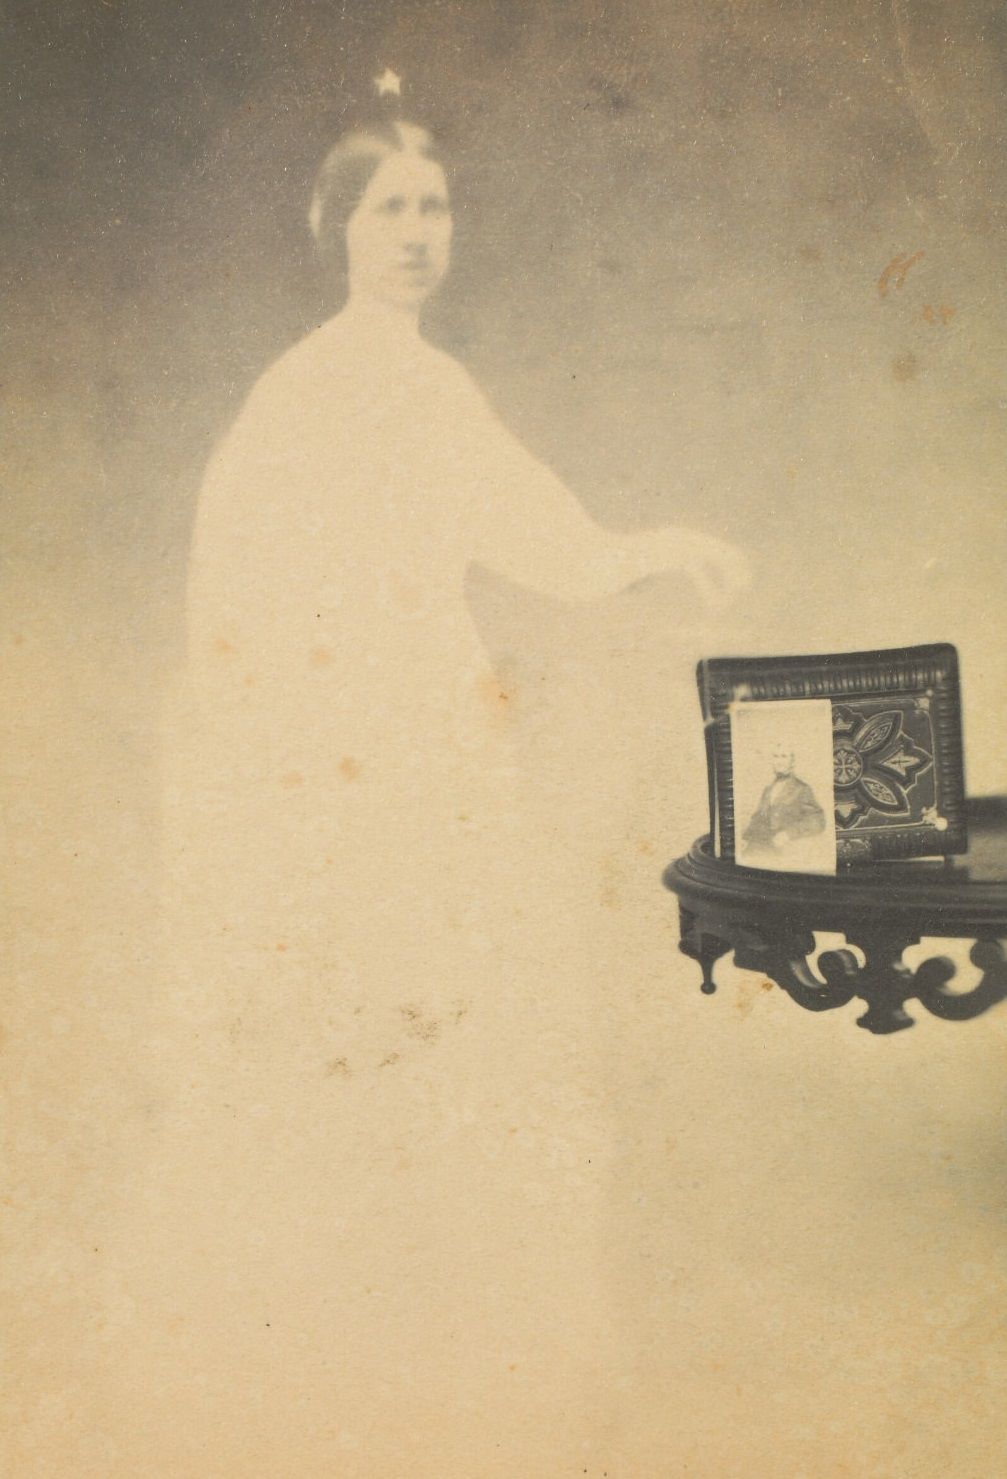 A photograph propped against an album on a side table, with the faint image of a woman next to it.